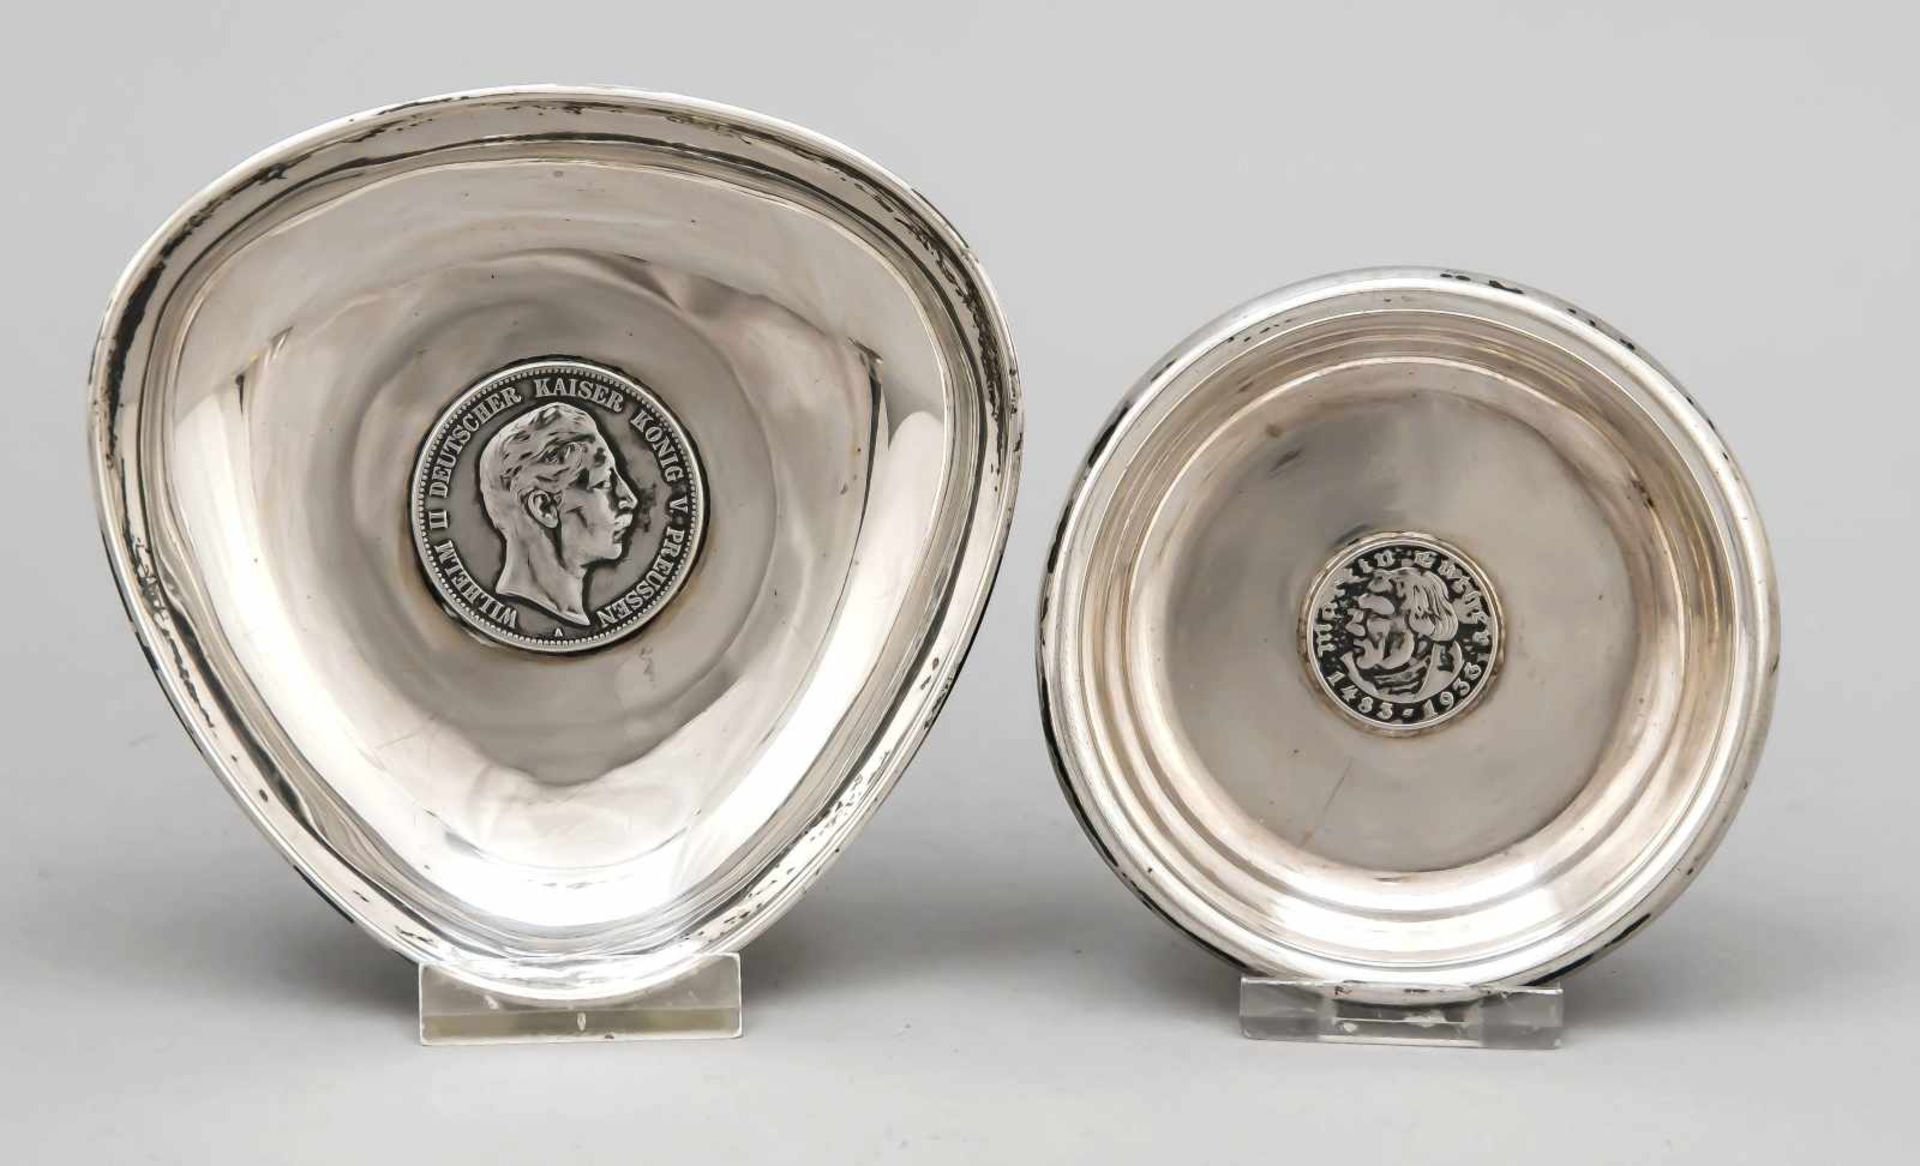 Two coin bowls, German, 1st half of the 20th century, different manufacturers, silver800/000 or